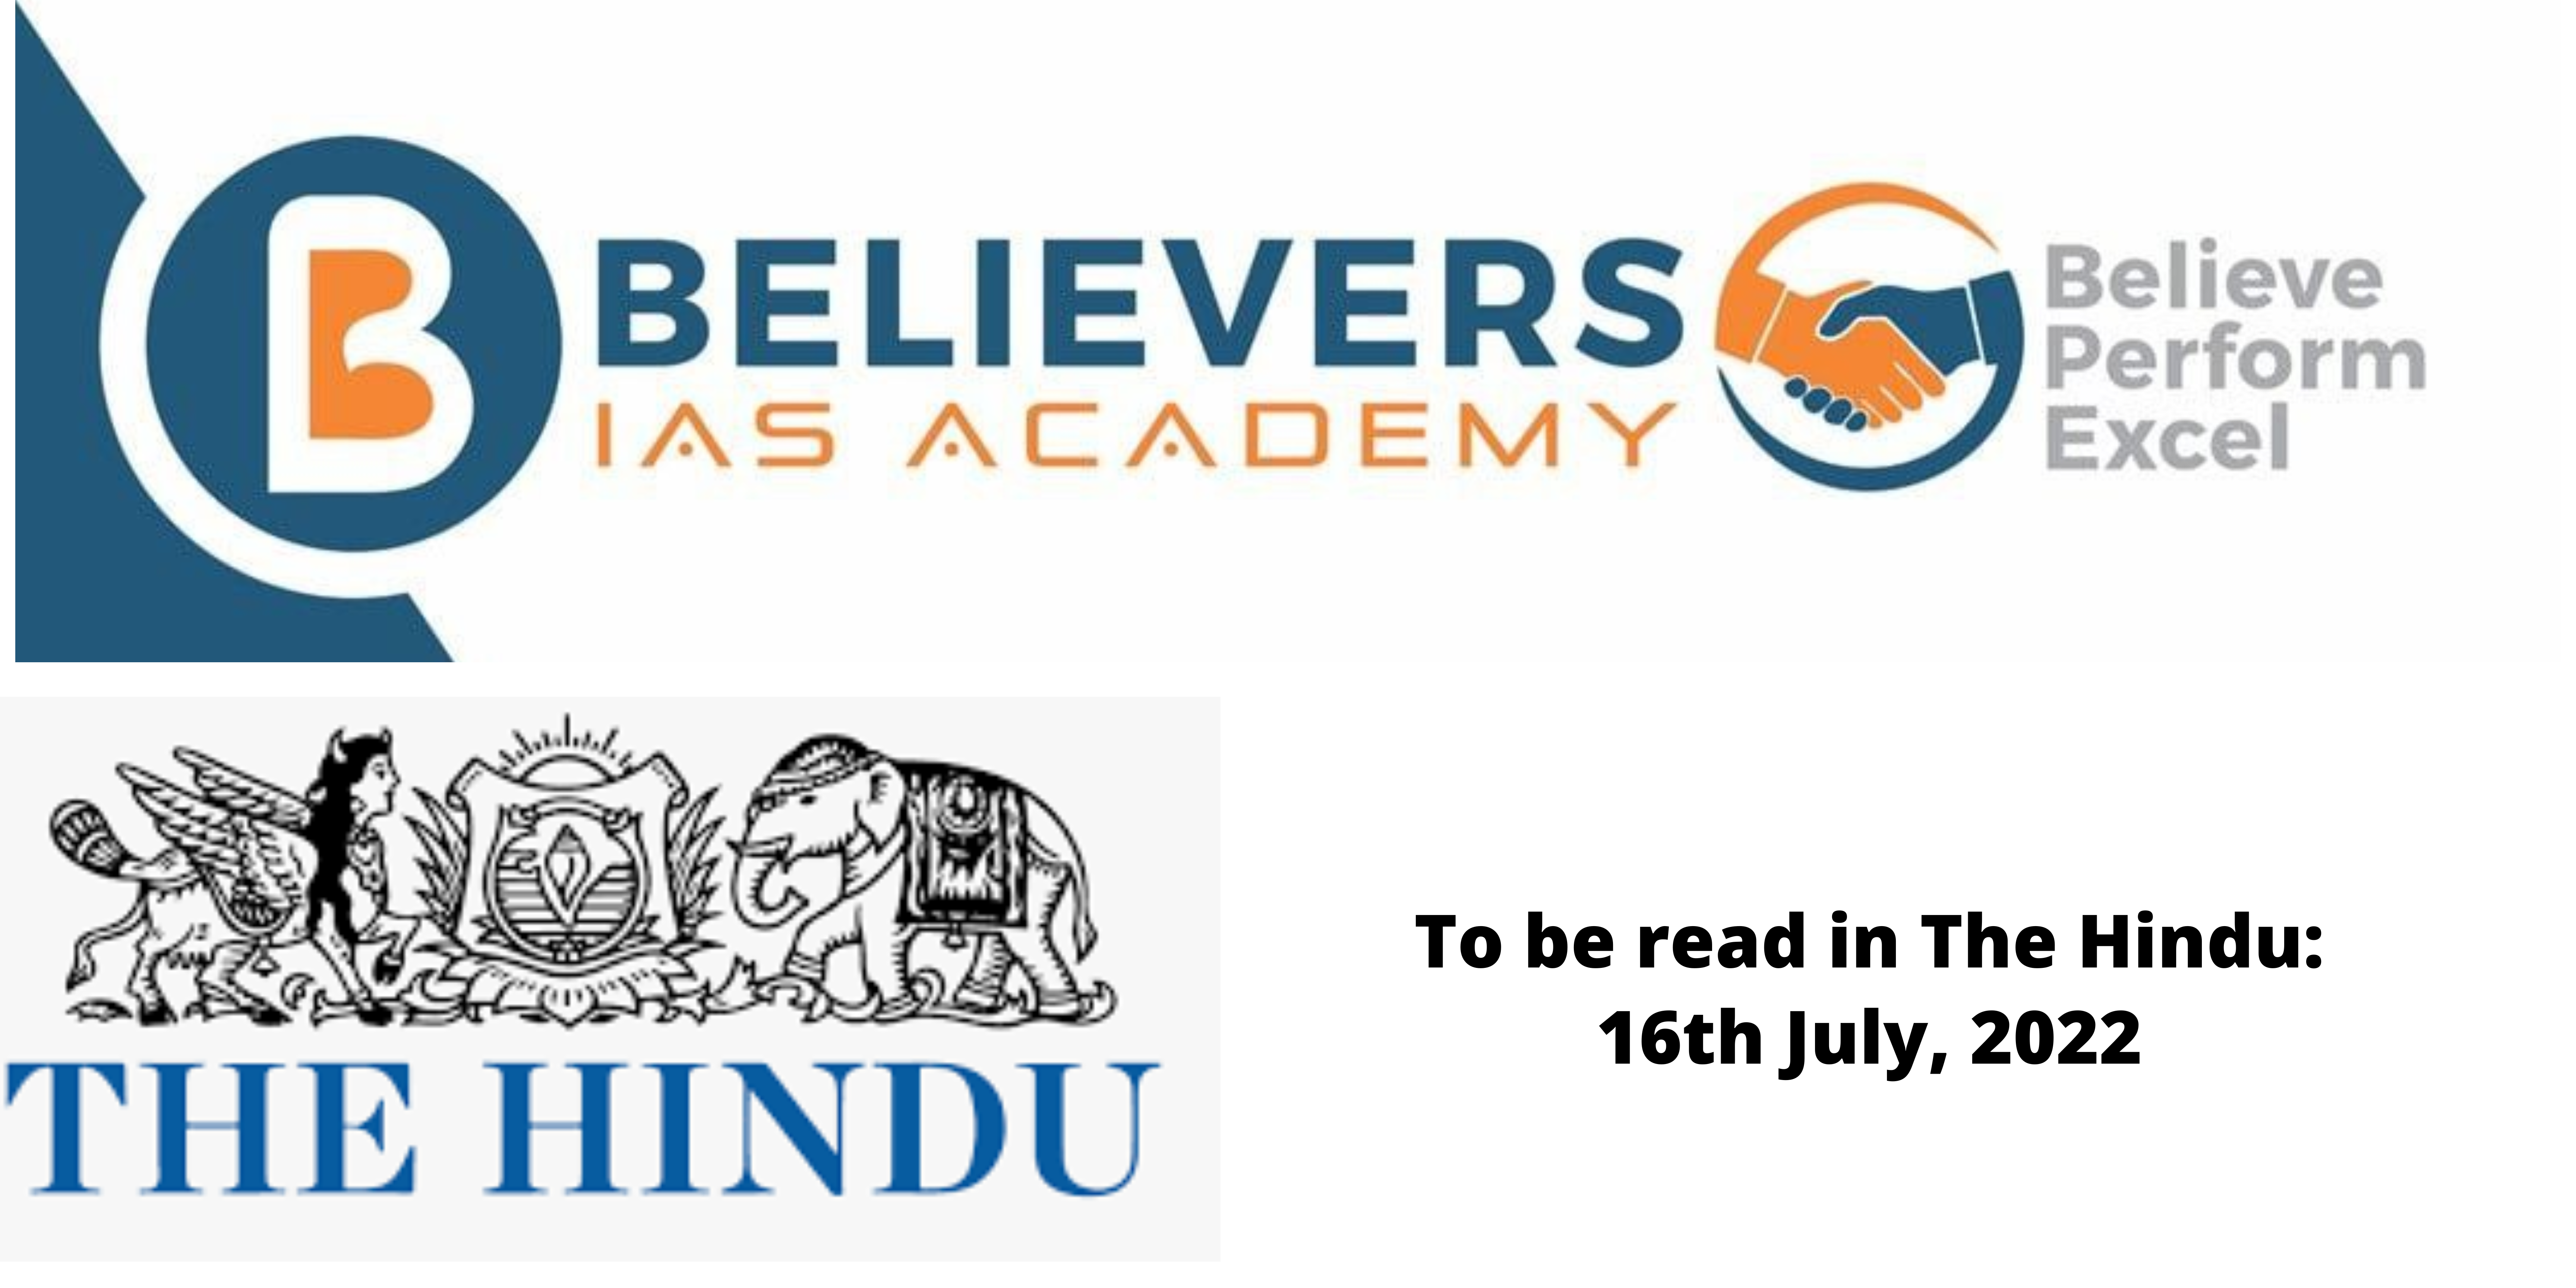 News articles for UPSC Exam preparation - 16th July, 2022